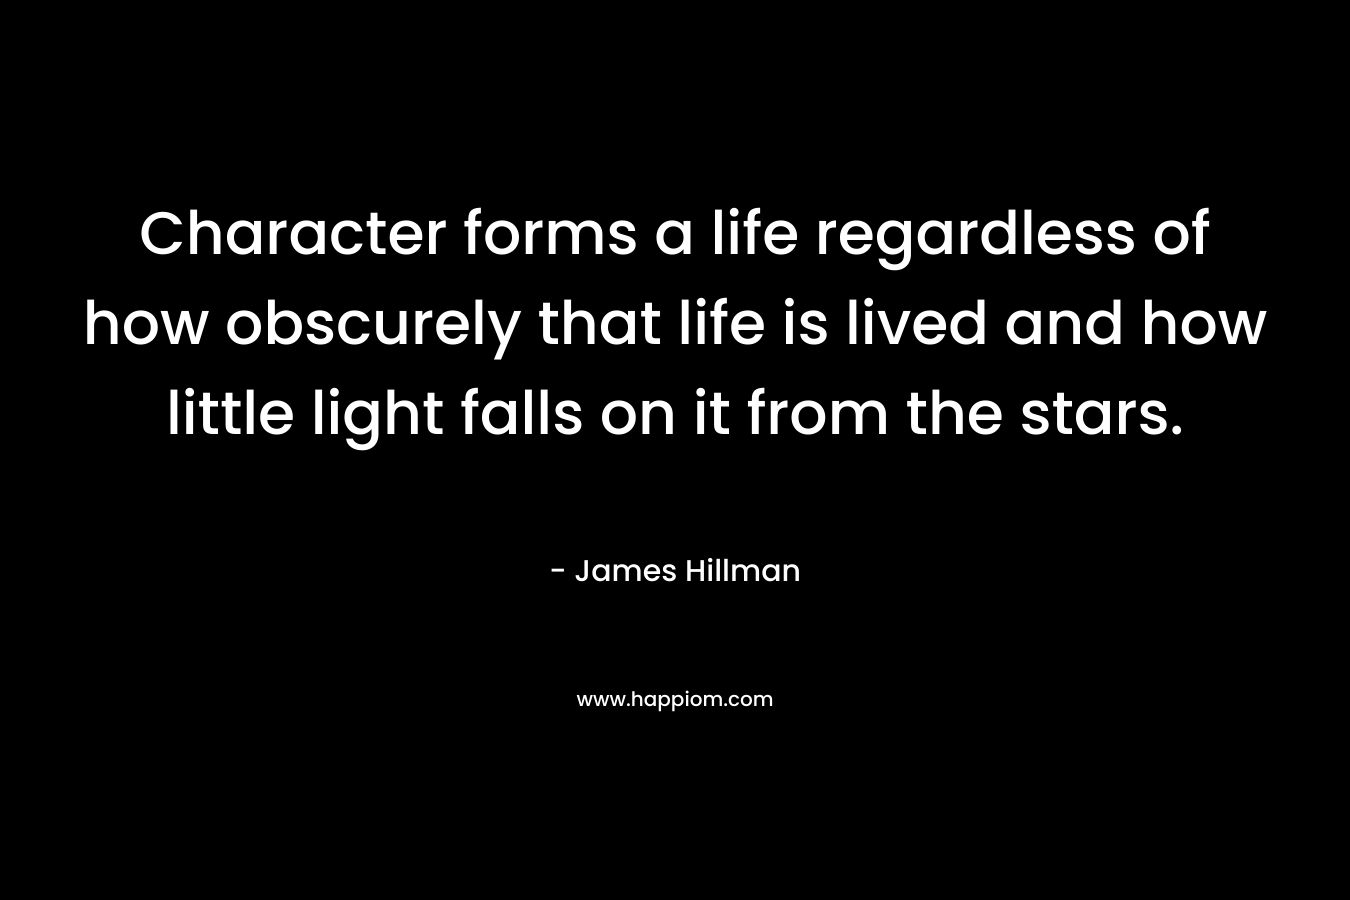 Character forms a life regardless of how obscurely that life is lived and how little light falls on it from the stars. – James Hillman